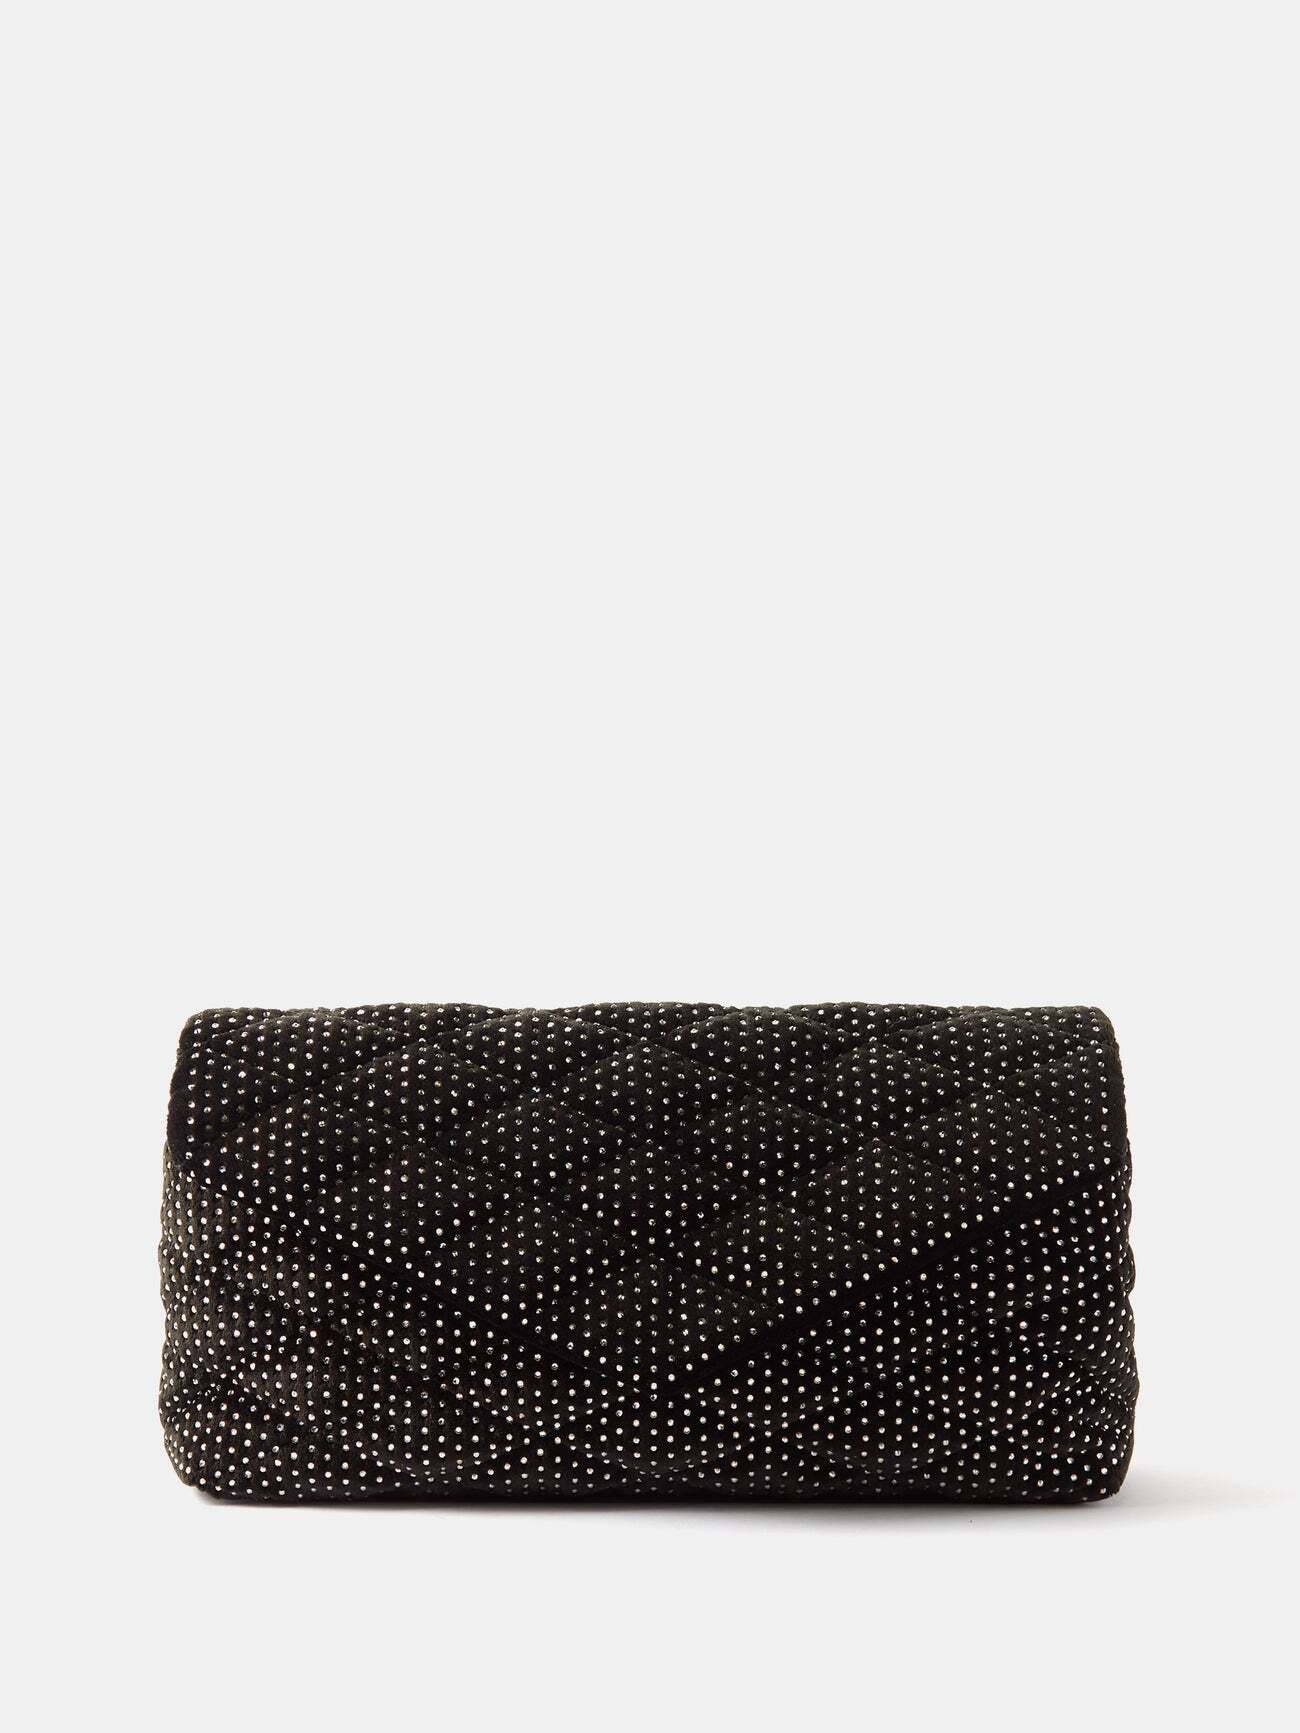 Saint Laurent - Sade Quilted-leather Clutch - Womens - Black